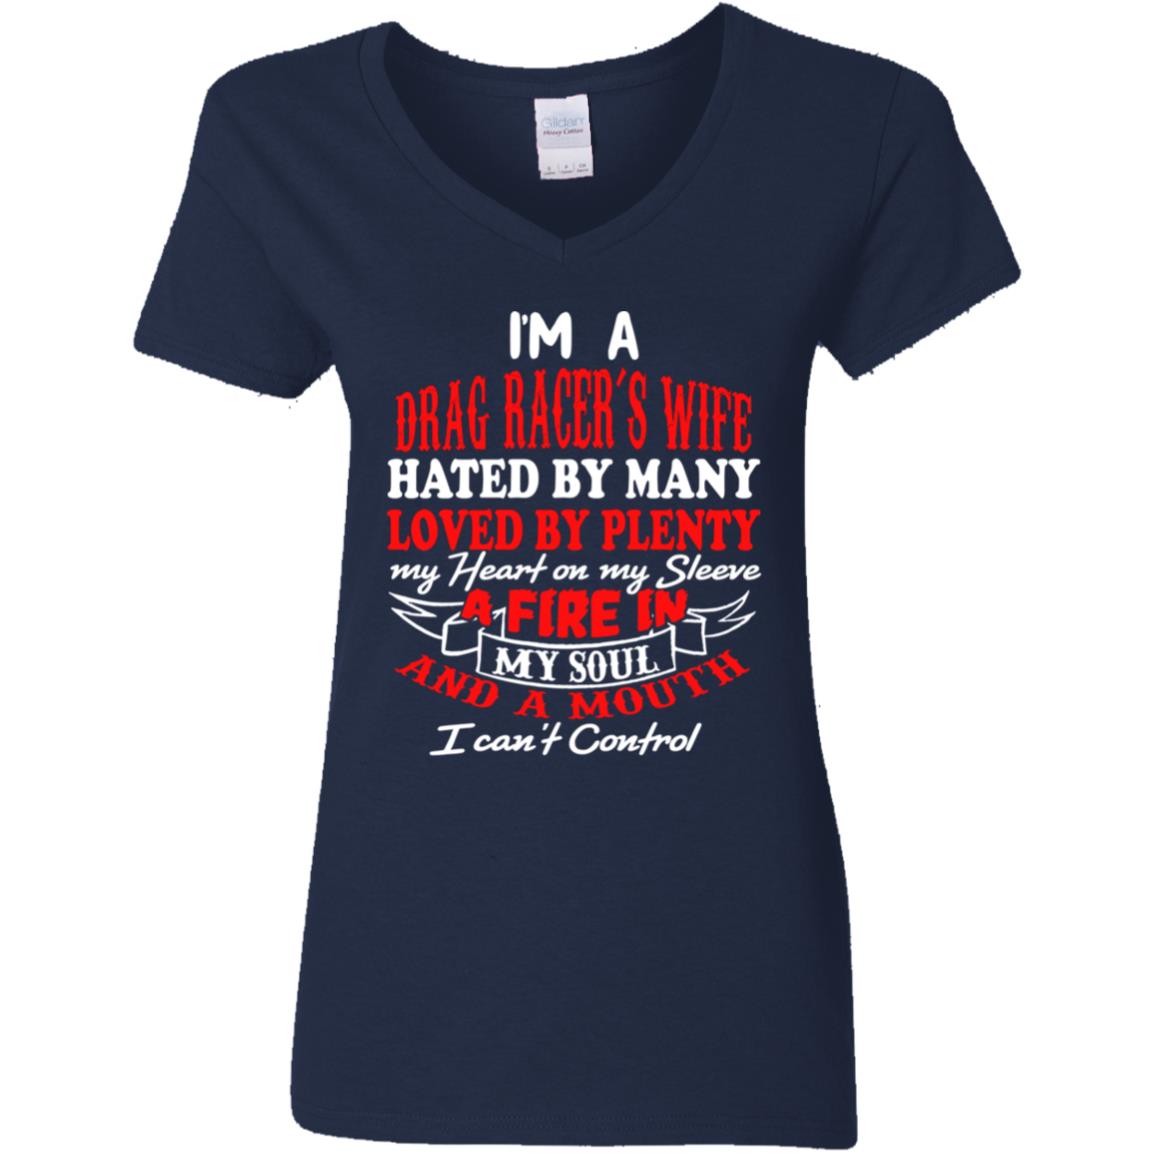 I'm A Drag Racer's Wife Hated By Many Loved By Plenty Ladies' 5.3 oz. V-Neck T-Shirt